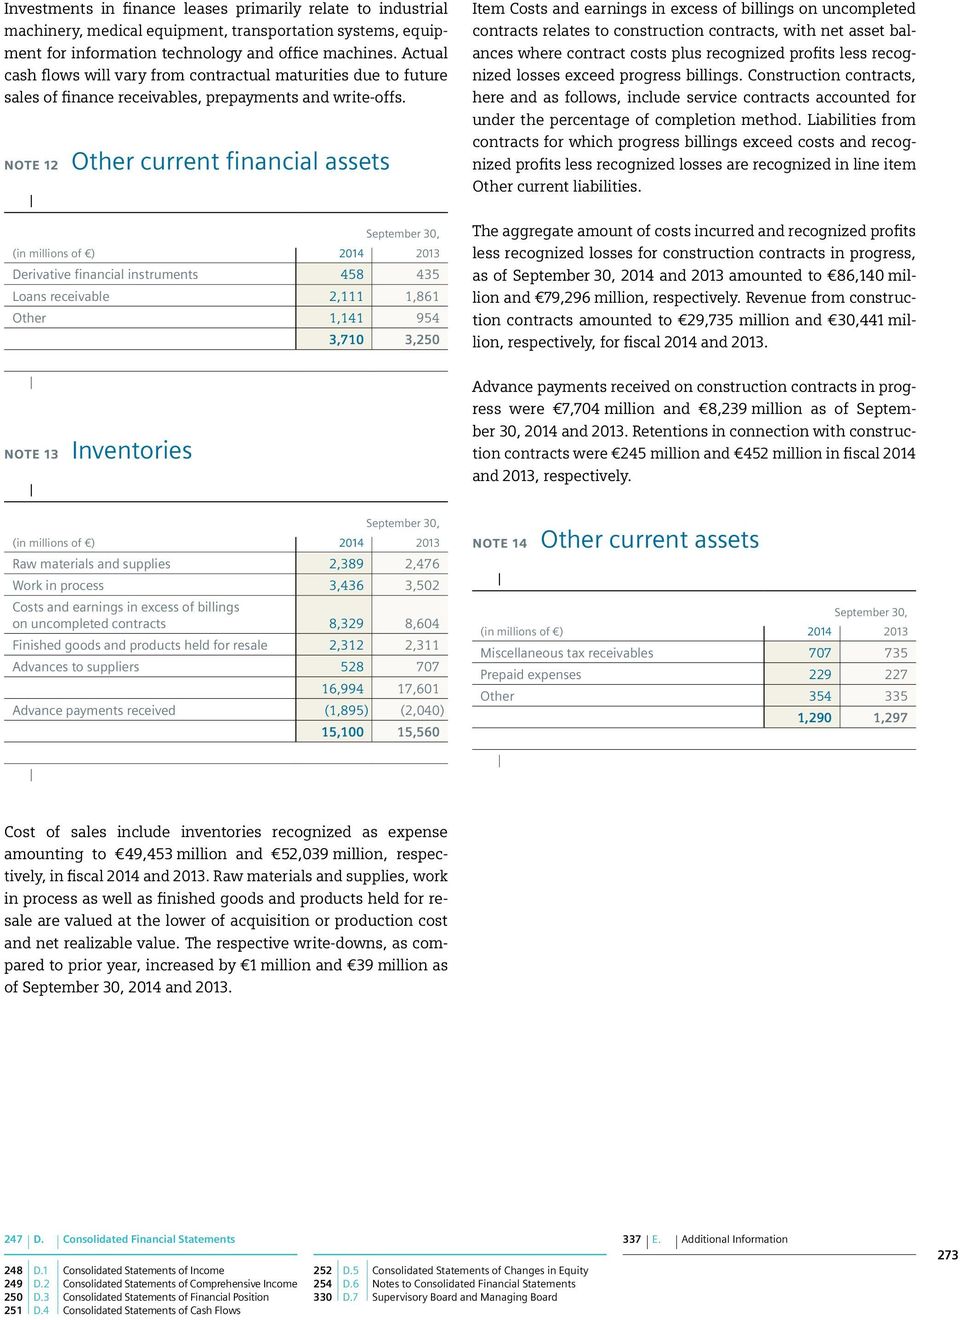 NOTE 12 Other current financial assets Item Costs and earnings in excess of billings on uncompleted contracts relates to construction contracts, with net asset balances where contract costs plus